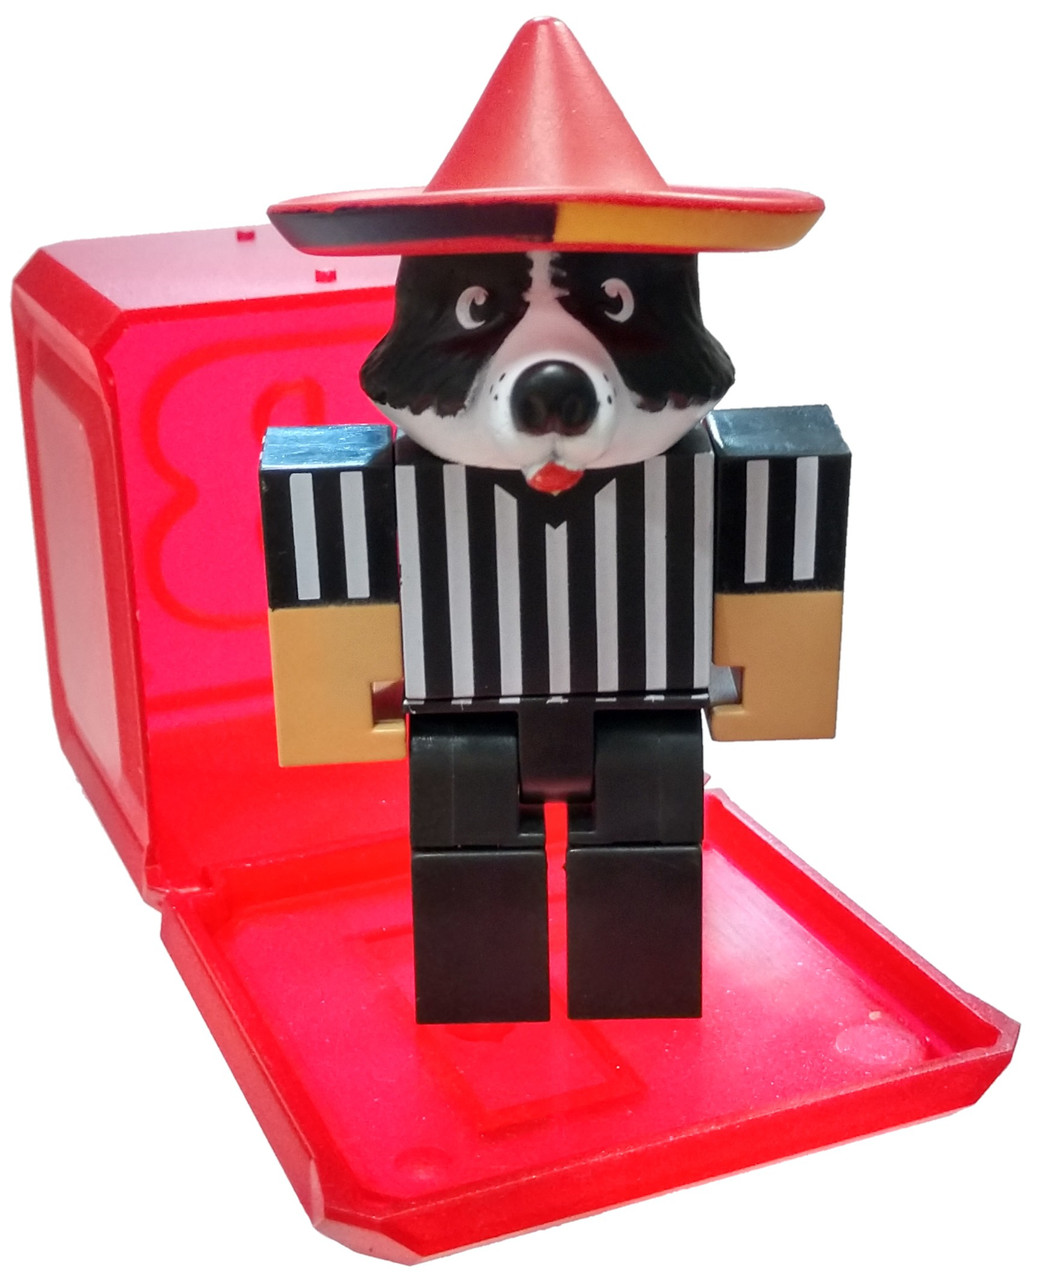 Roblox Celebrity Collection Series 5 High School Life Referee 3 Mini Figure With Red Cube And Online Code Loose Jazwares Toywiz - disco life roblox